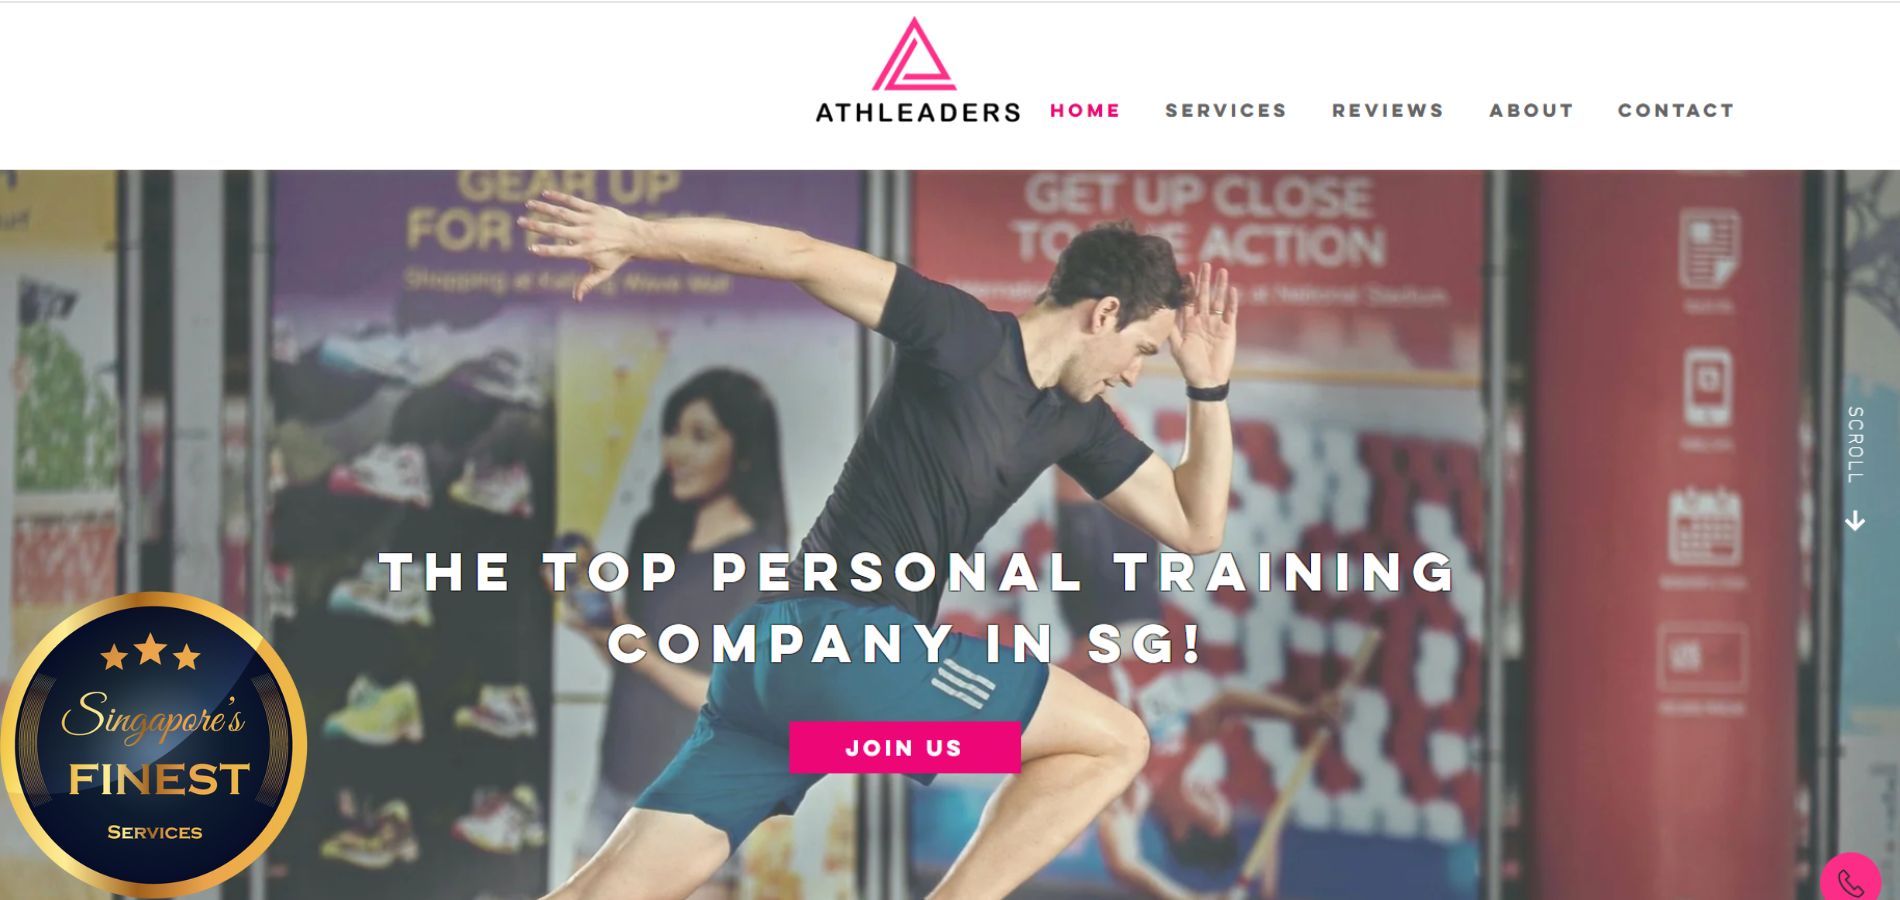  Athleaders - Personal Trainer Singapore